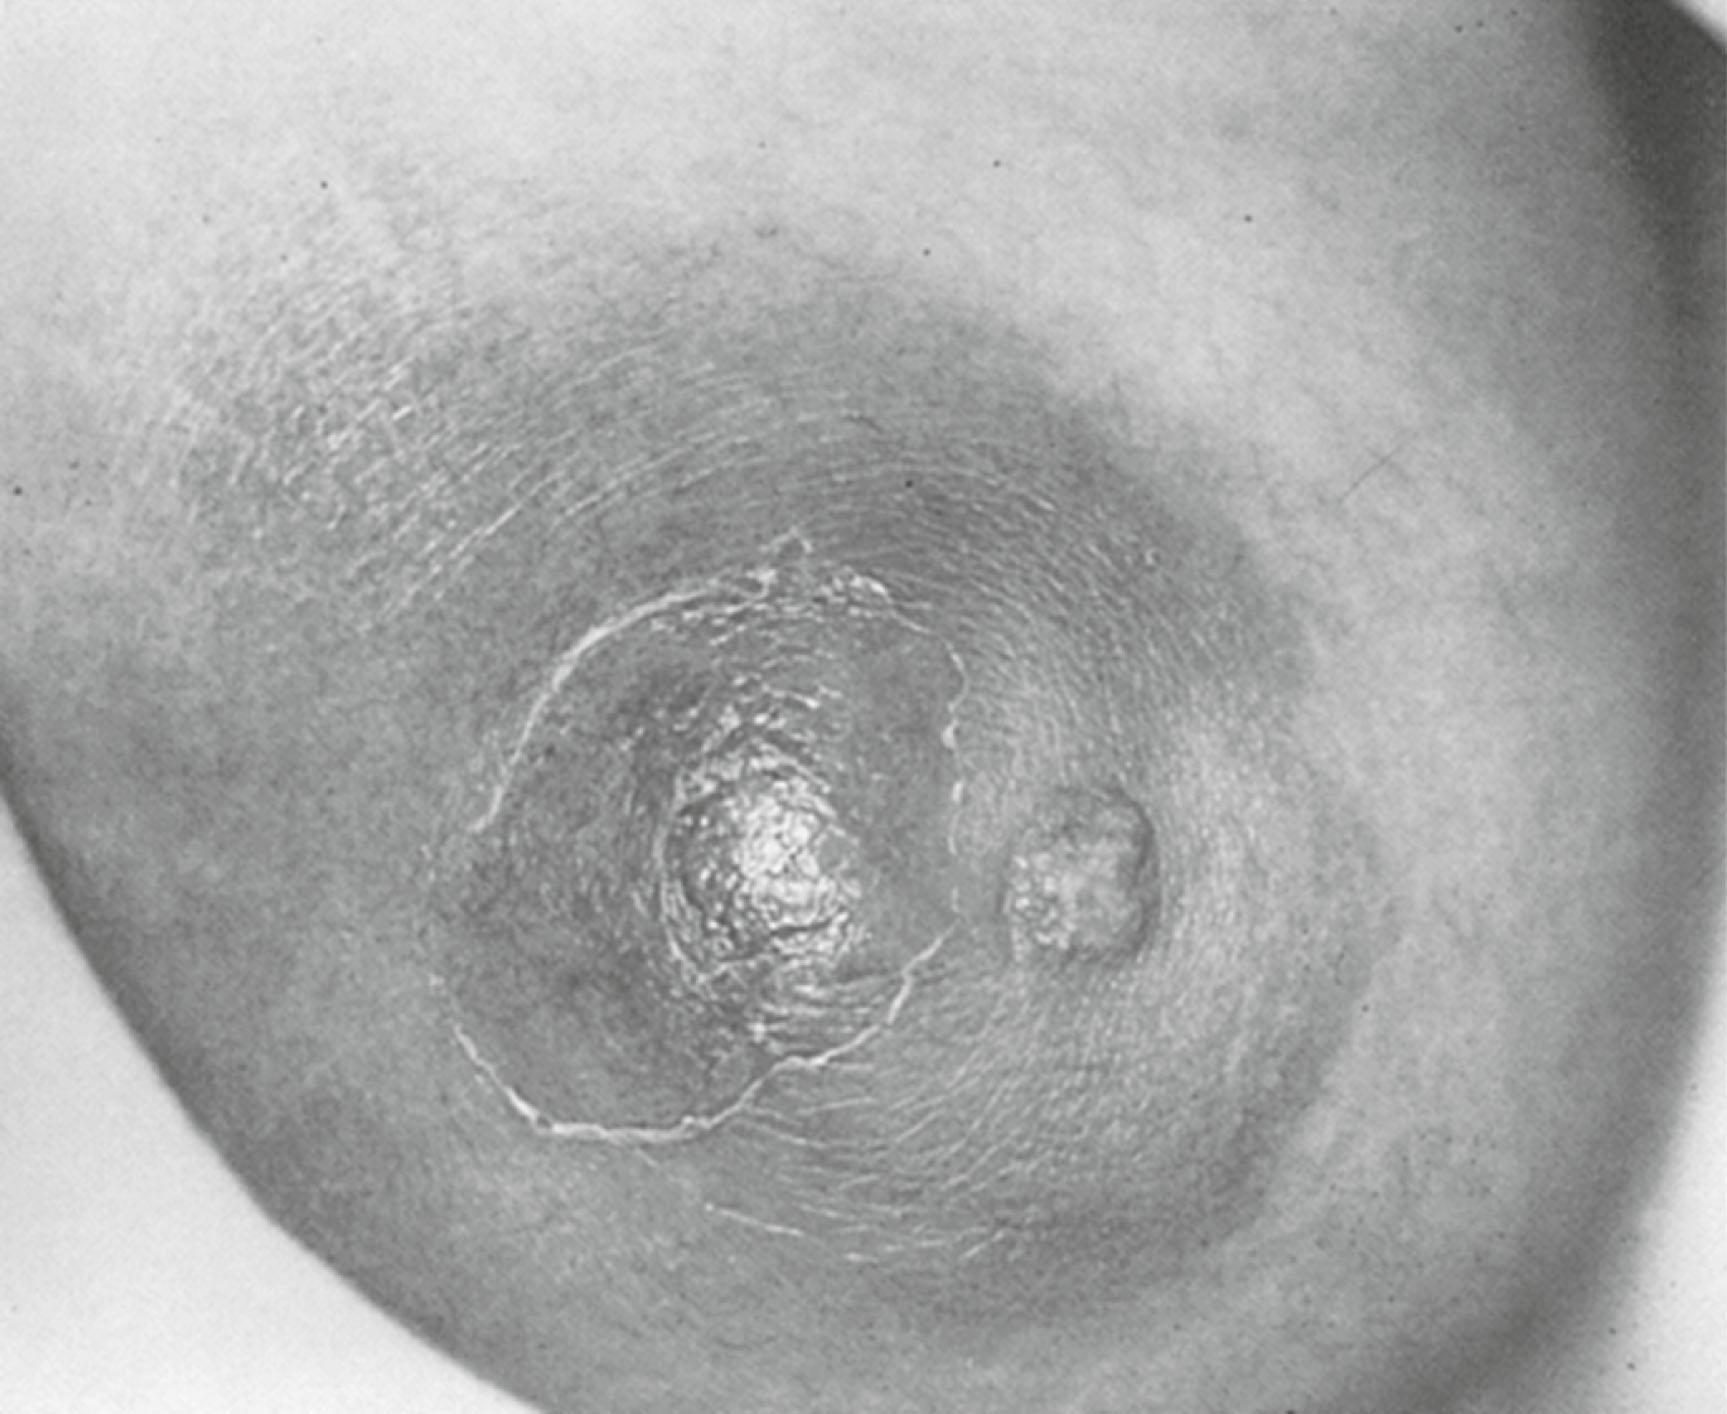 Fig. 15.1, A 38-year-old smoker presented with acute onset of right breast pain. A red, hot, tender, fluctuant mass was observed.